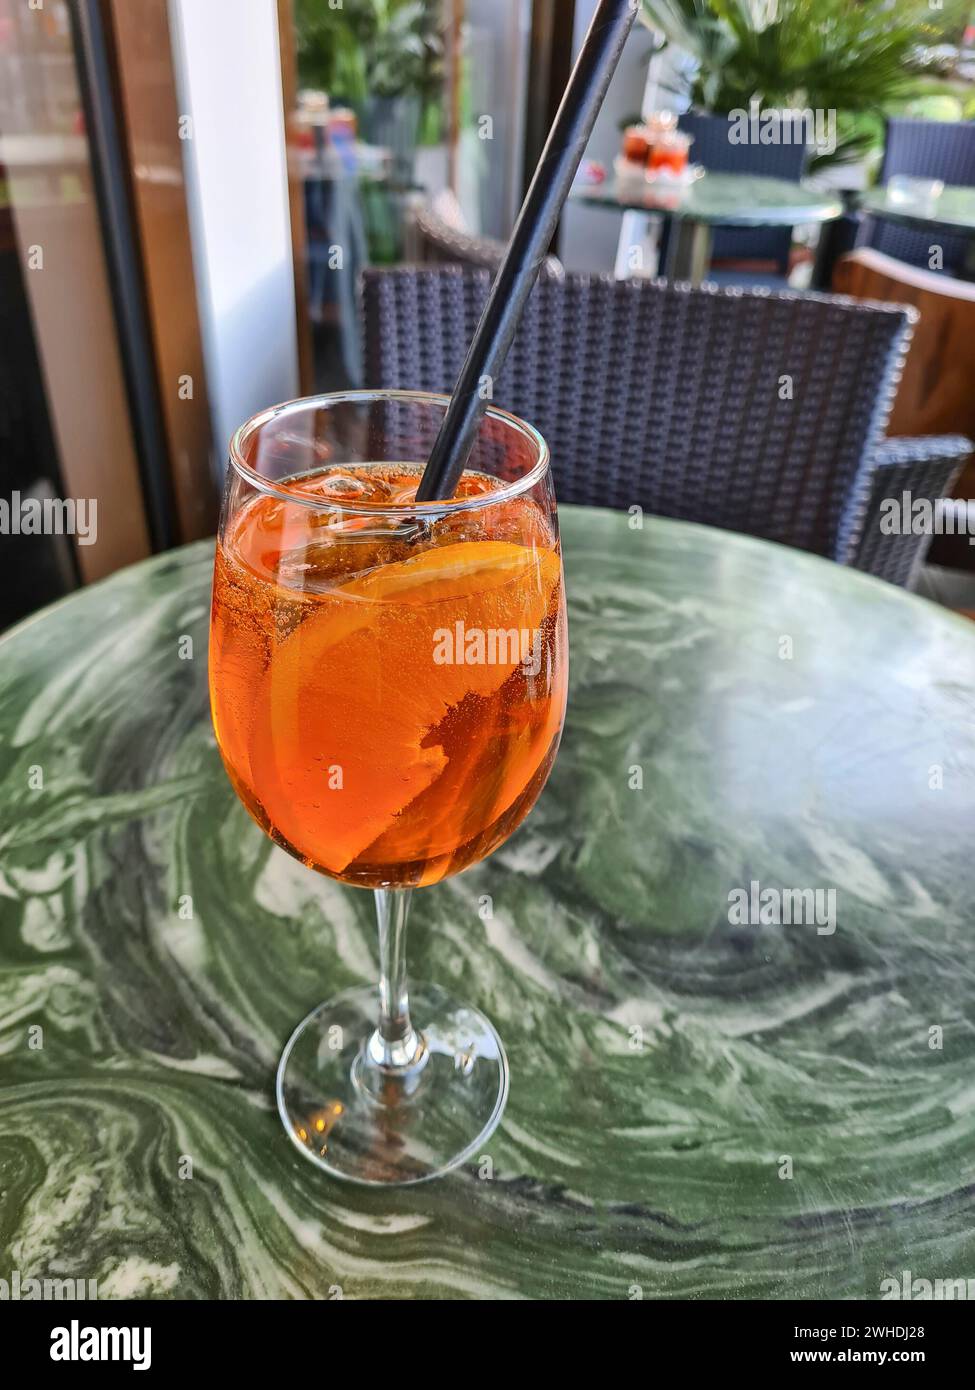 The alcoholic soft drink Aperol Spritz with a slice of orange in the glass and a black straw stands alone on a table outside the restaurant Stock Photo